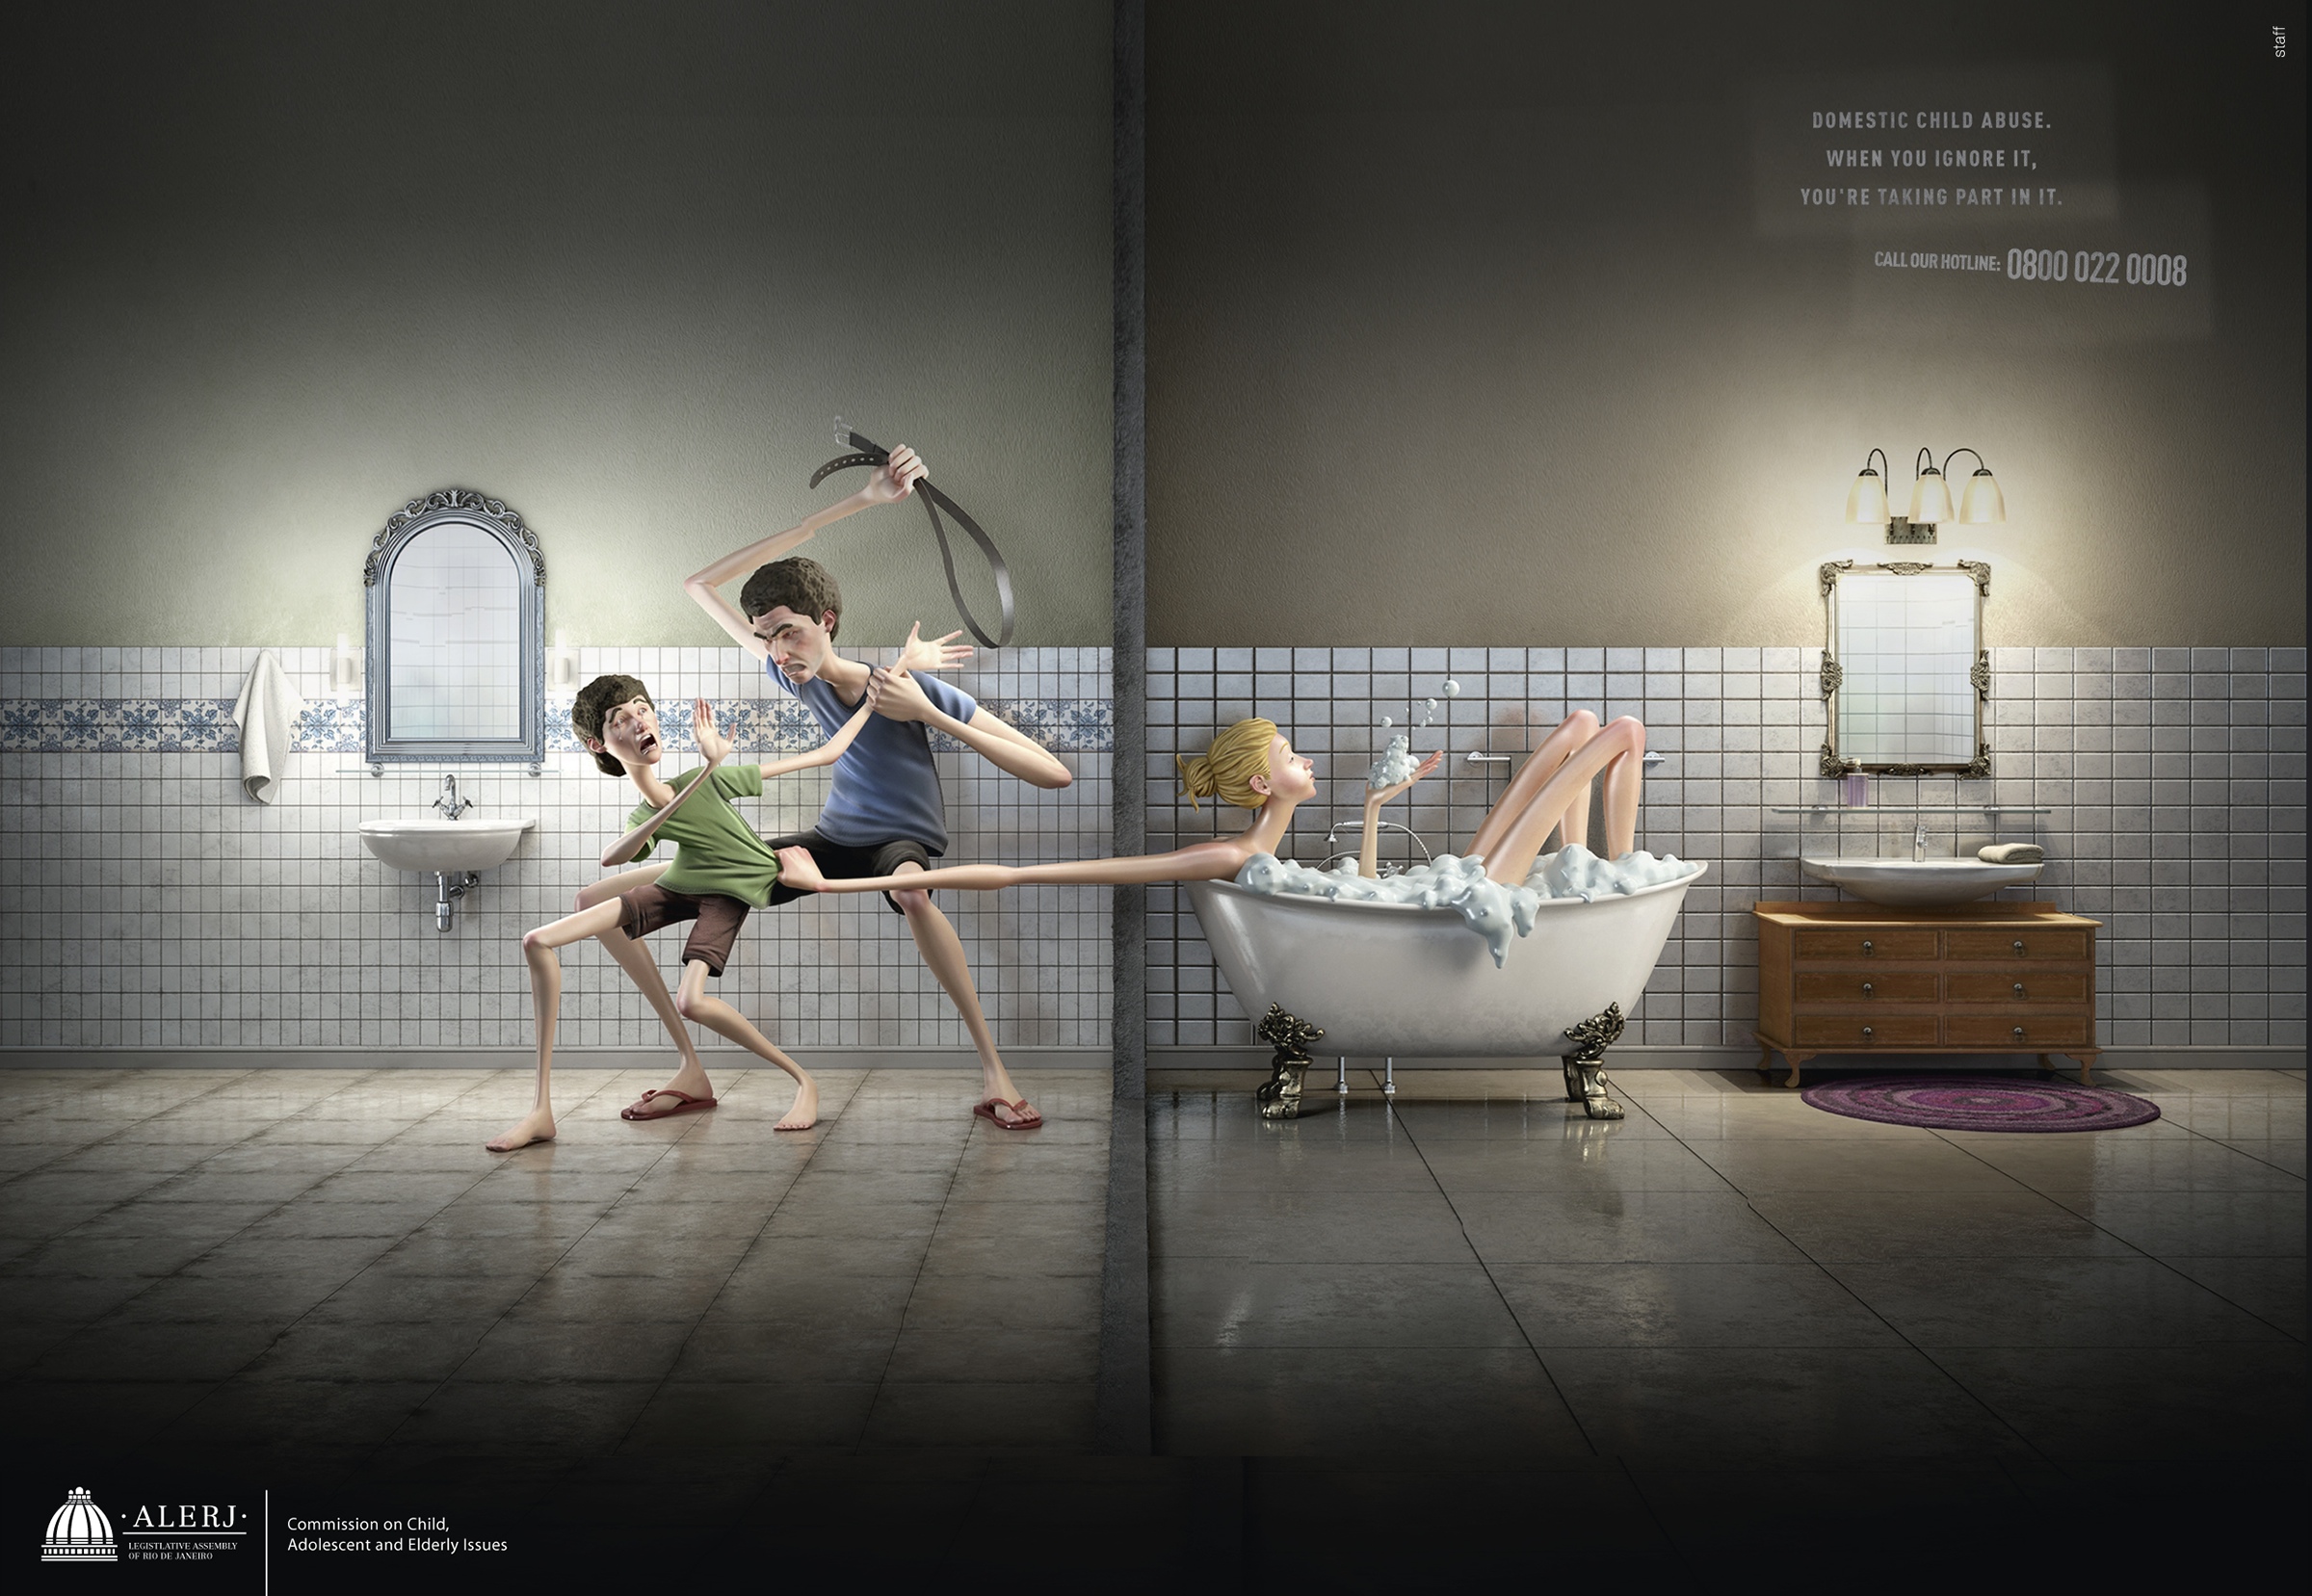 Domestic Child Abuse. When you ignore it, you’re taking part in it. Iptran don't drink and drive Campaigns of the World®